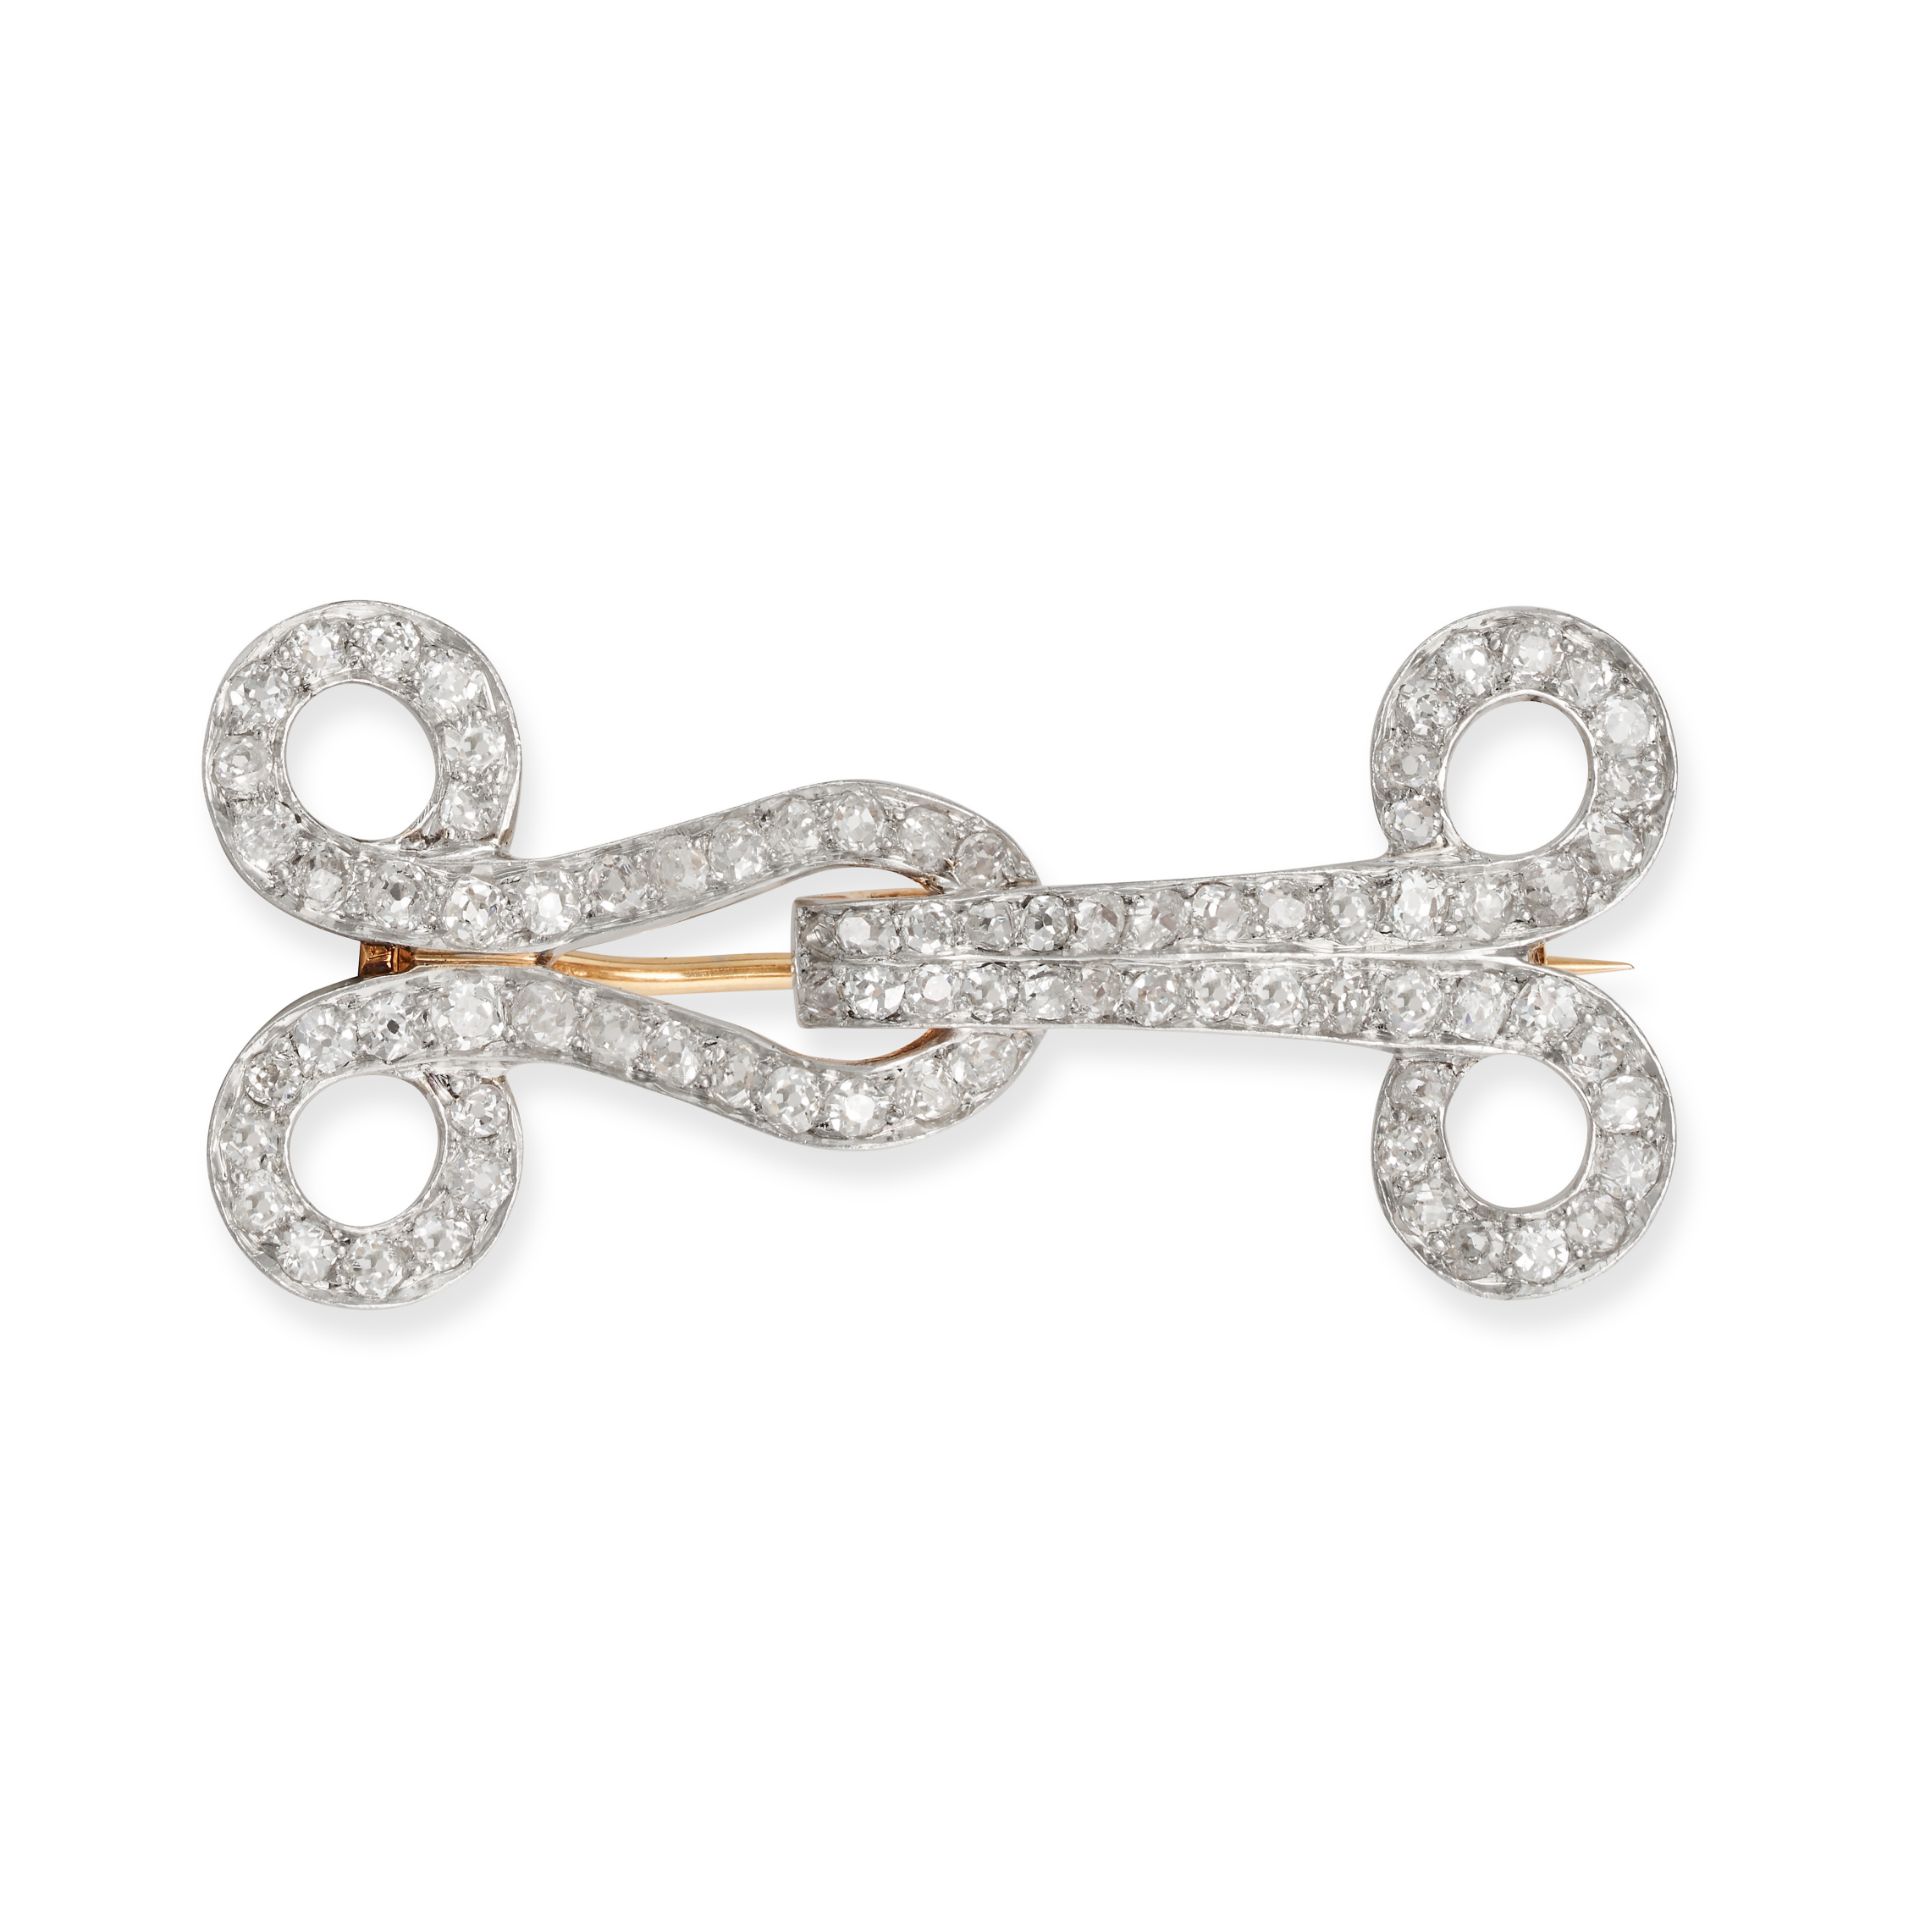 TIFFANY & CO., A DIAMOND BROOCH in 18ct white and yellow gold, the scrolling brooch set throughou...